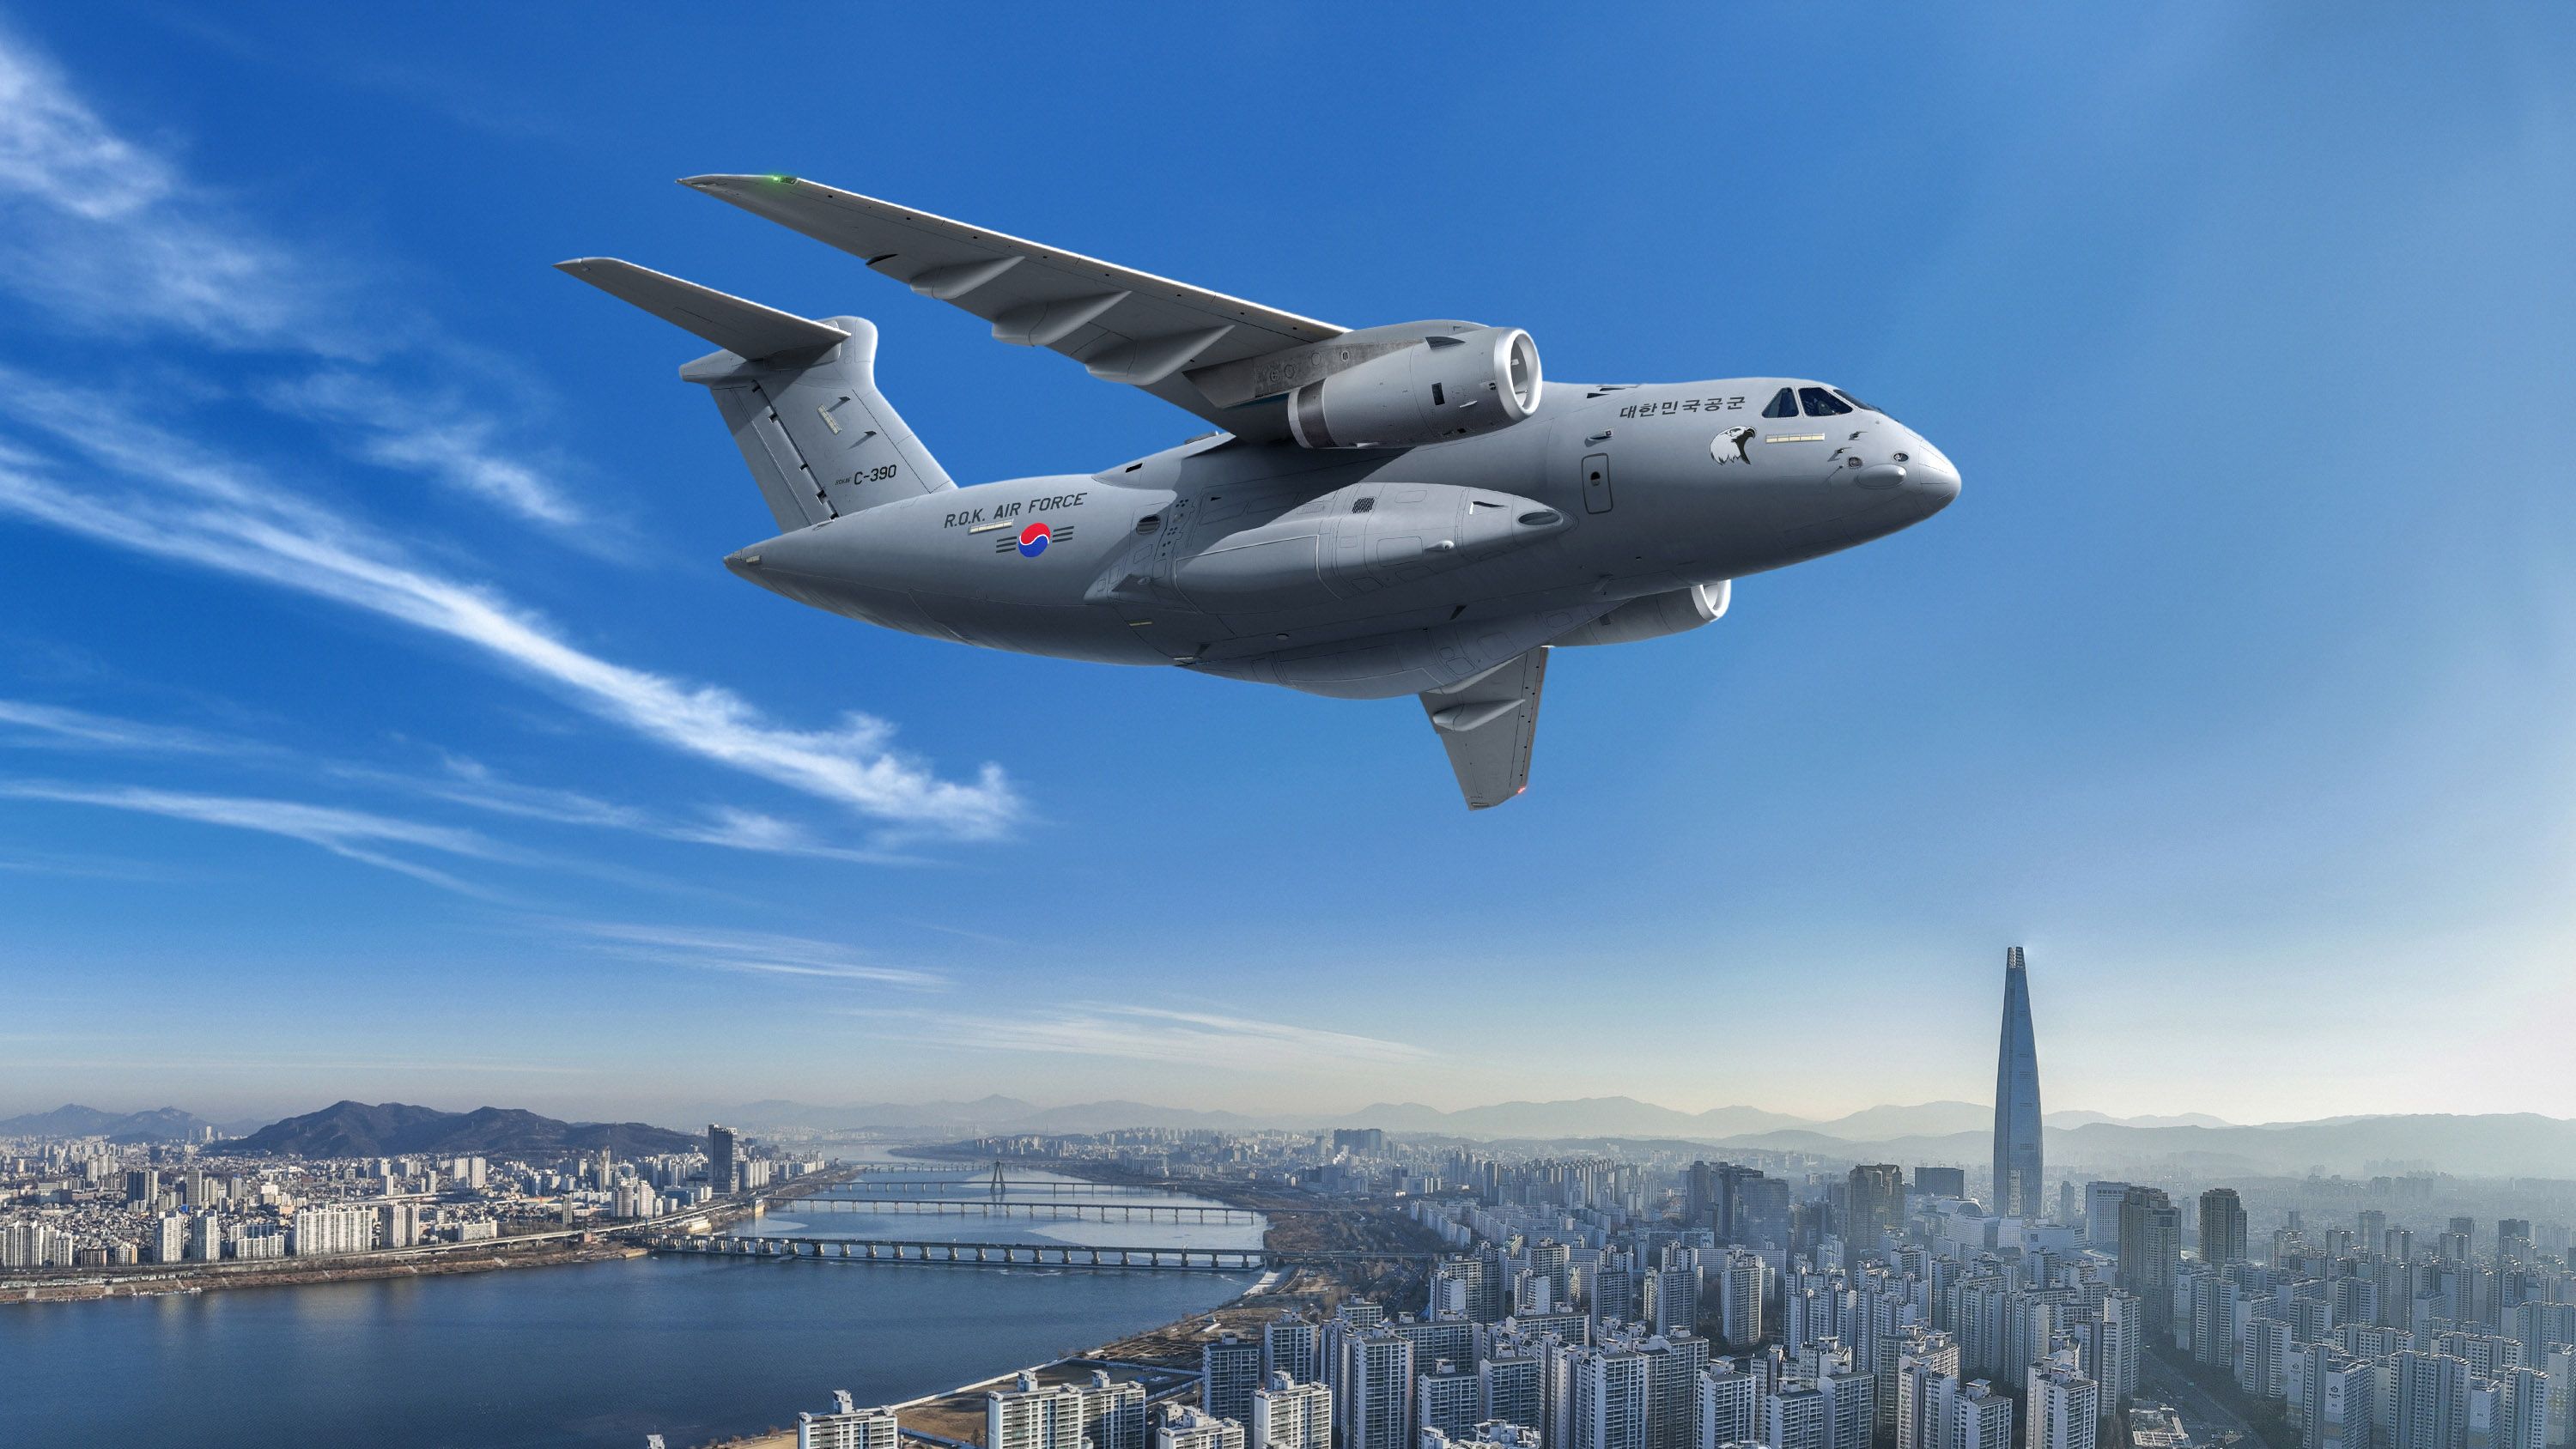 Embraer will supply the Republic of Korea with new C-390 Millennium military aircraft.